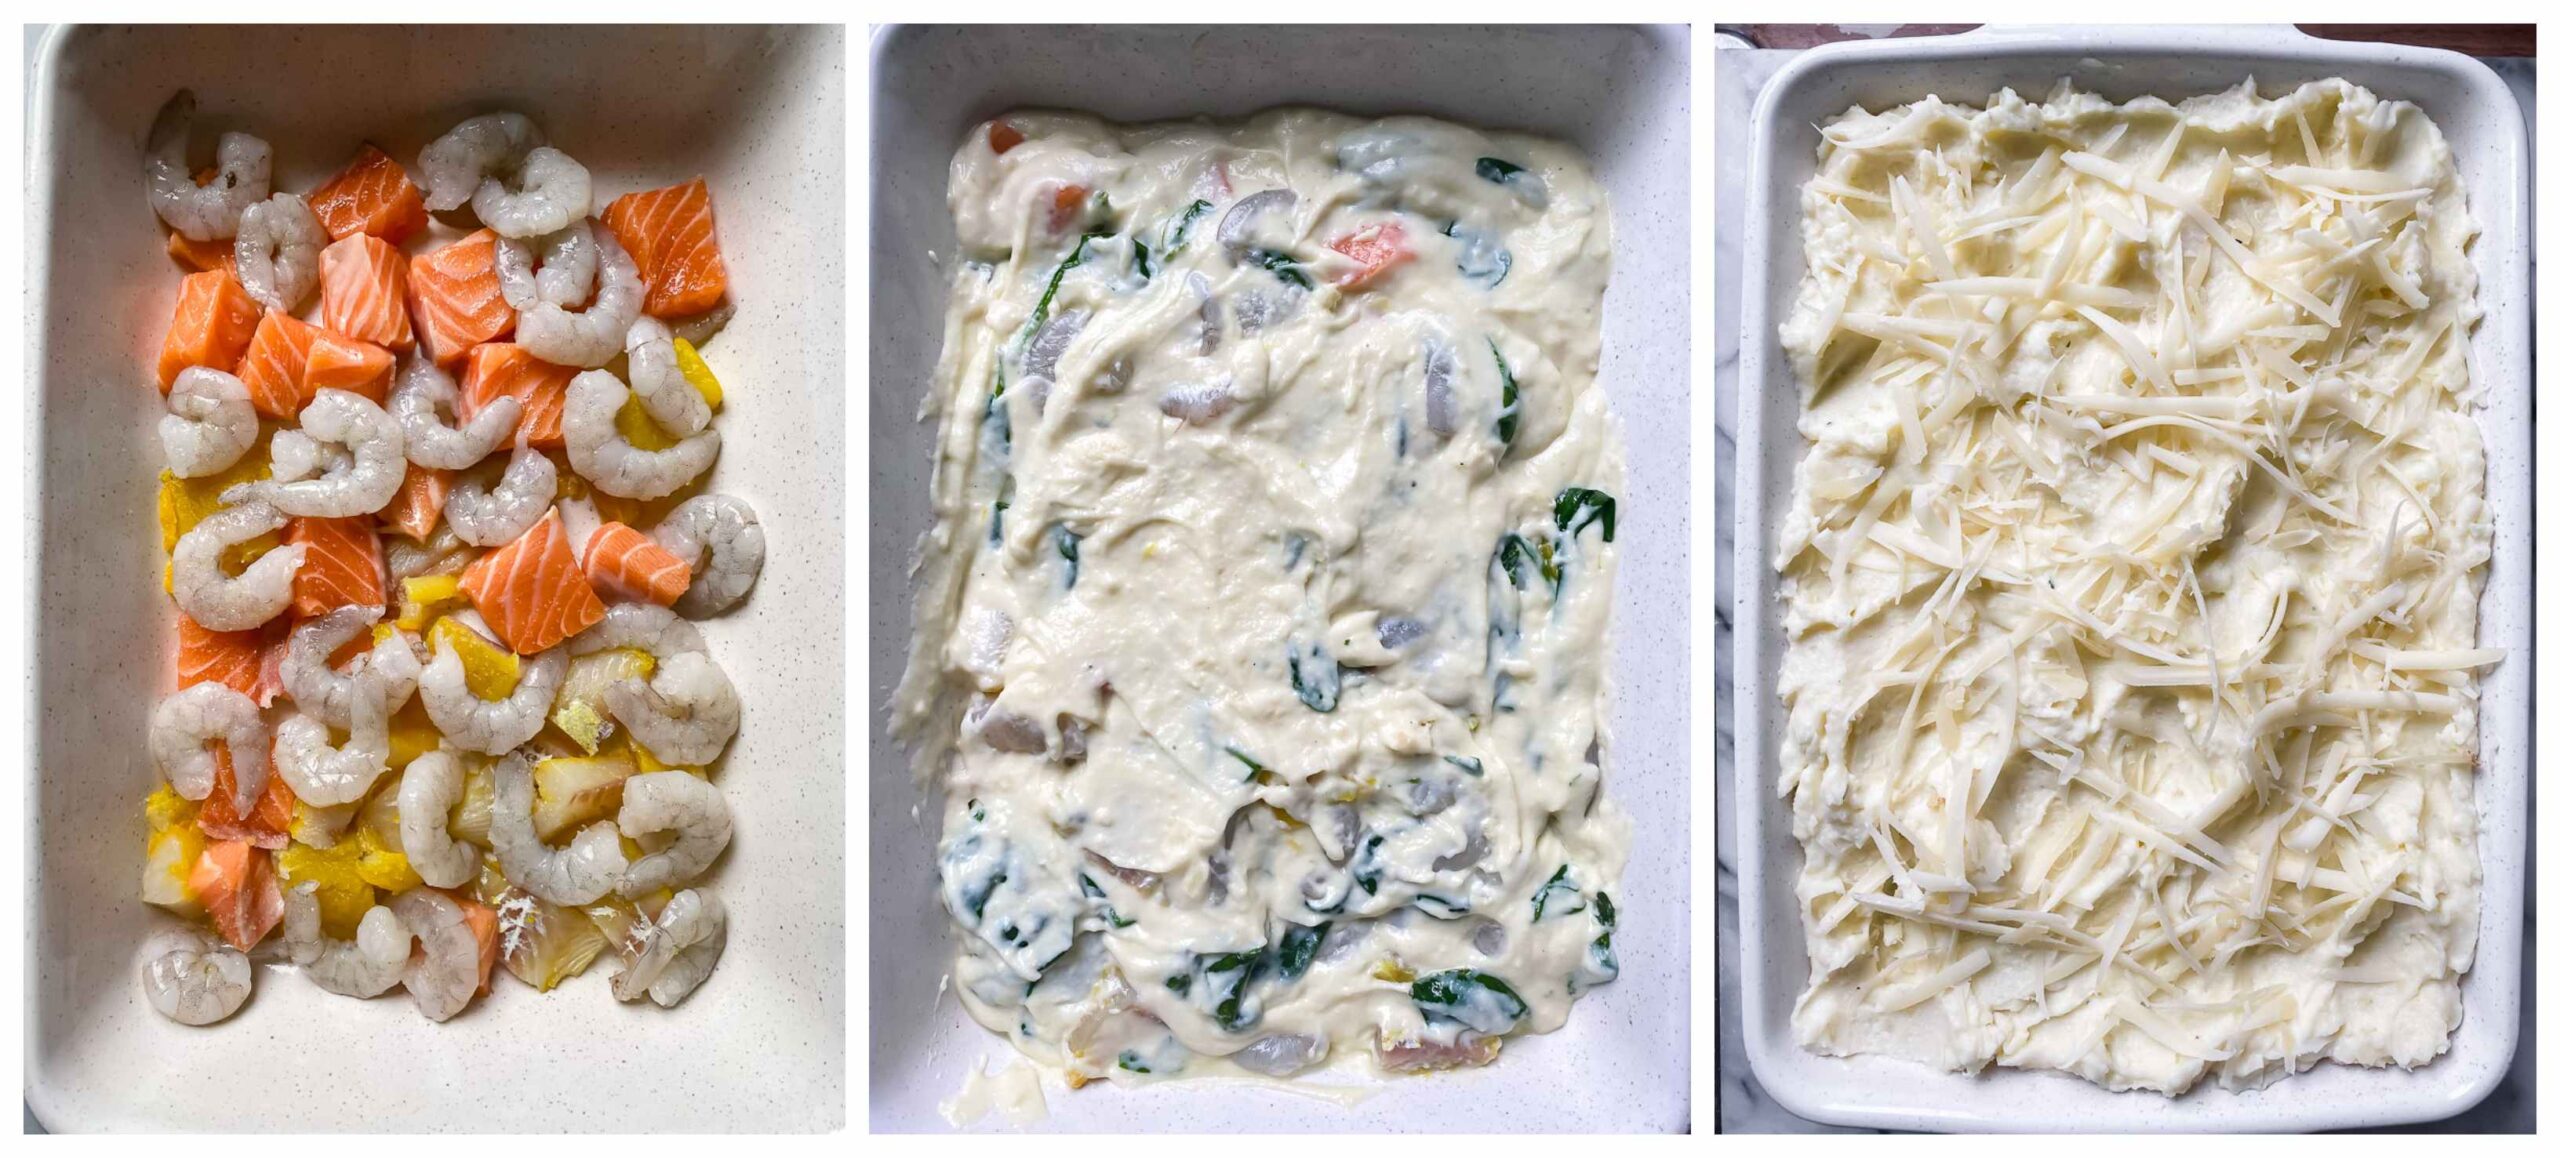 fish pie assembly process images